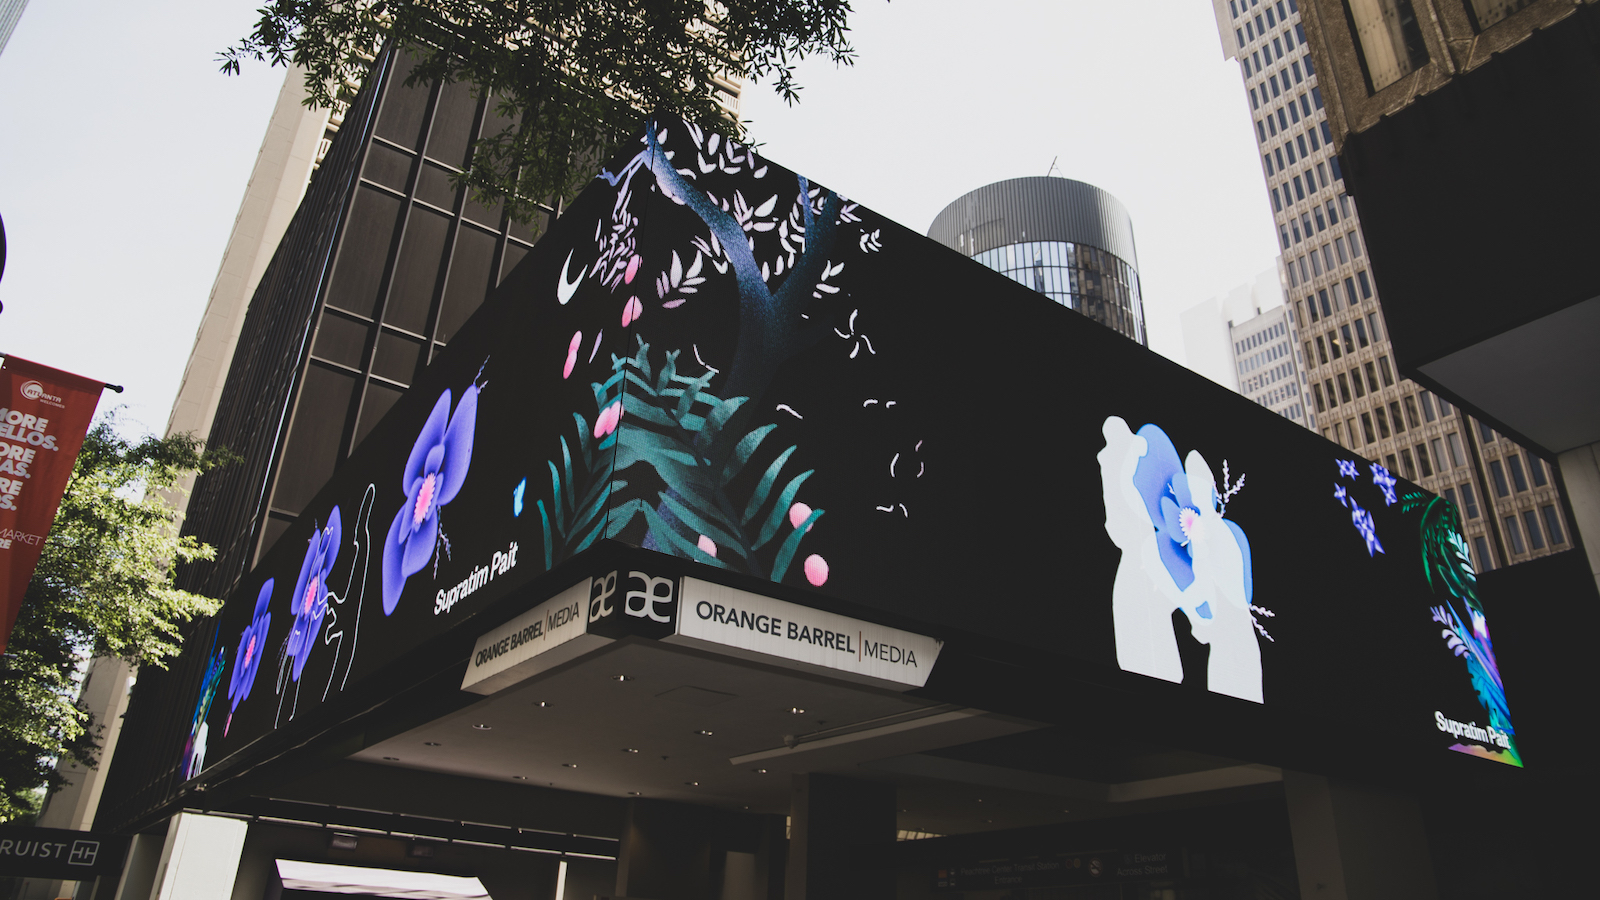 Digital Media master's student Supratim Pait created the artwork Close for a billboard media exhibition in Atlanta during June and July 2023.
